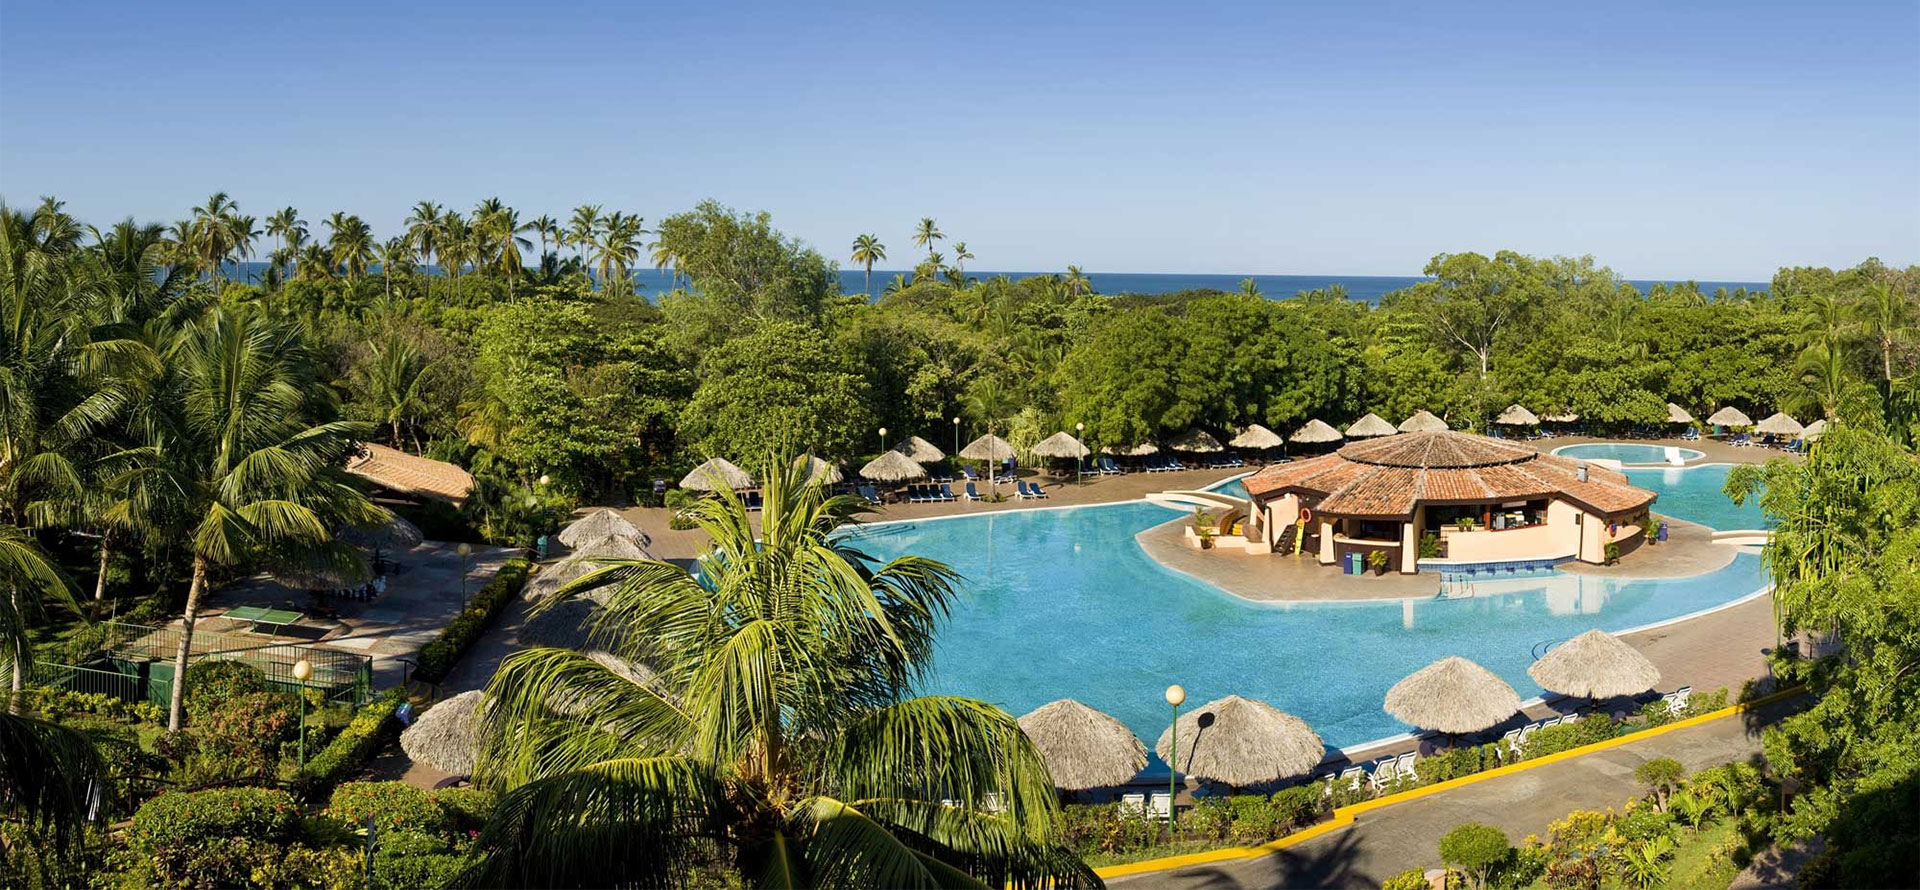 Belize all-inclusive adults only resorts.